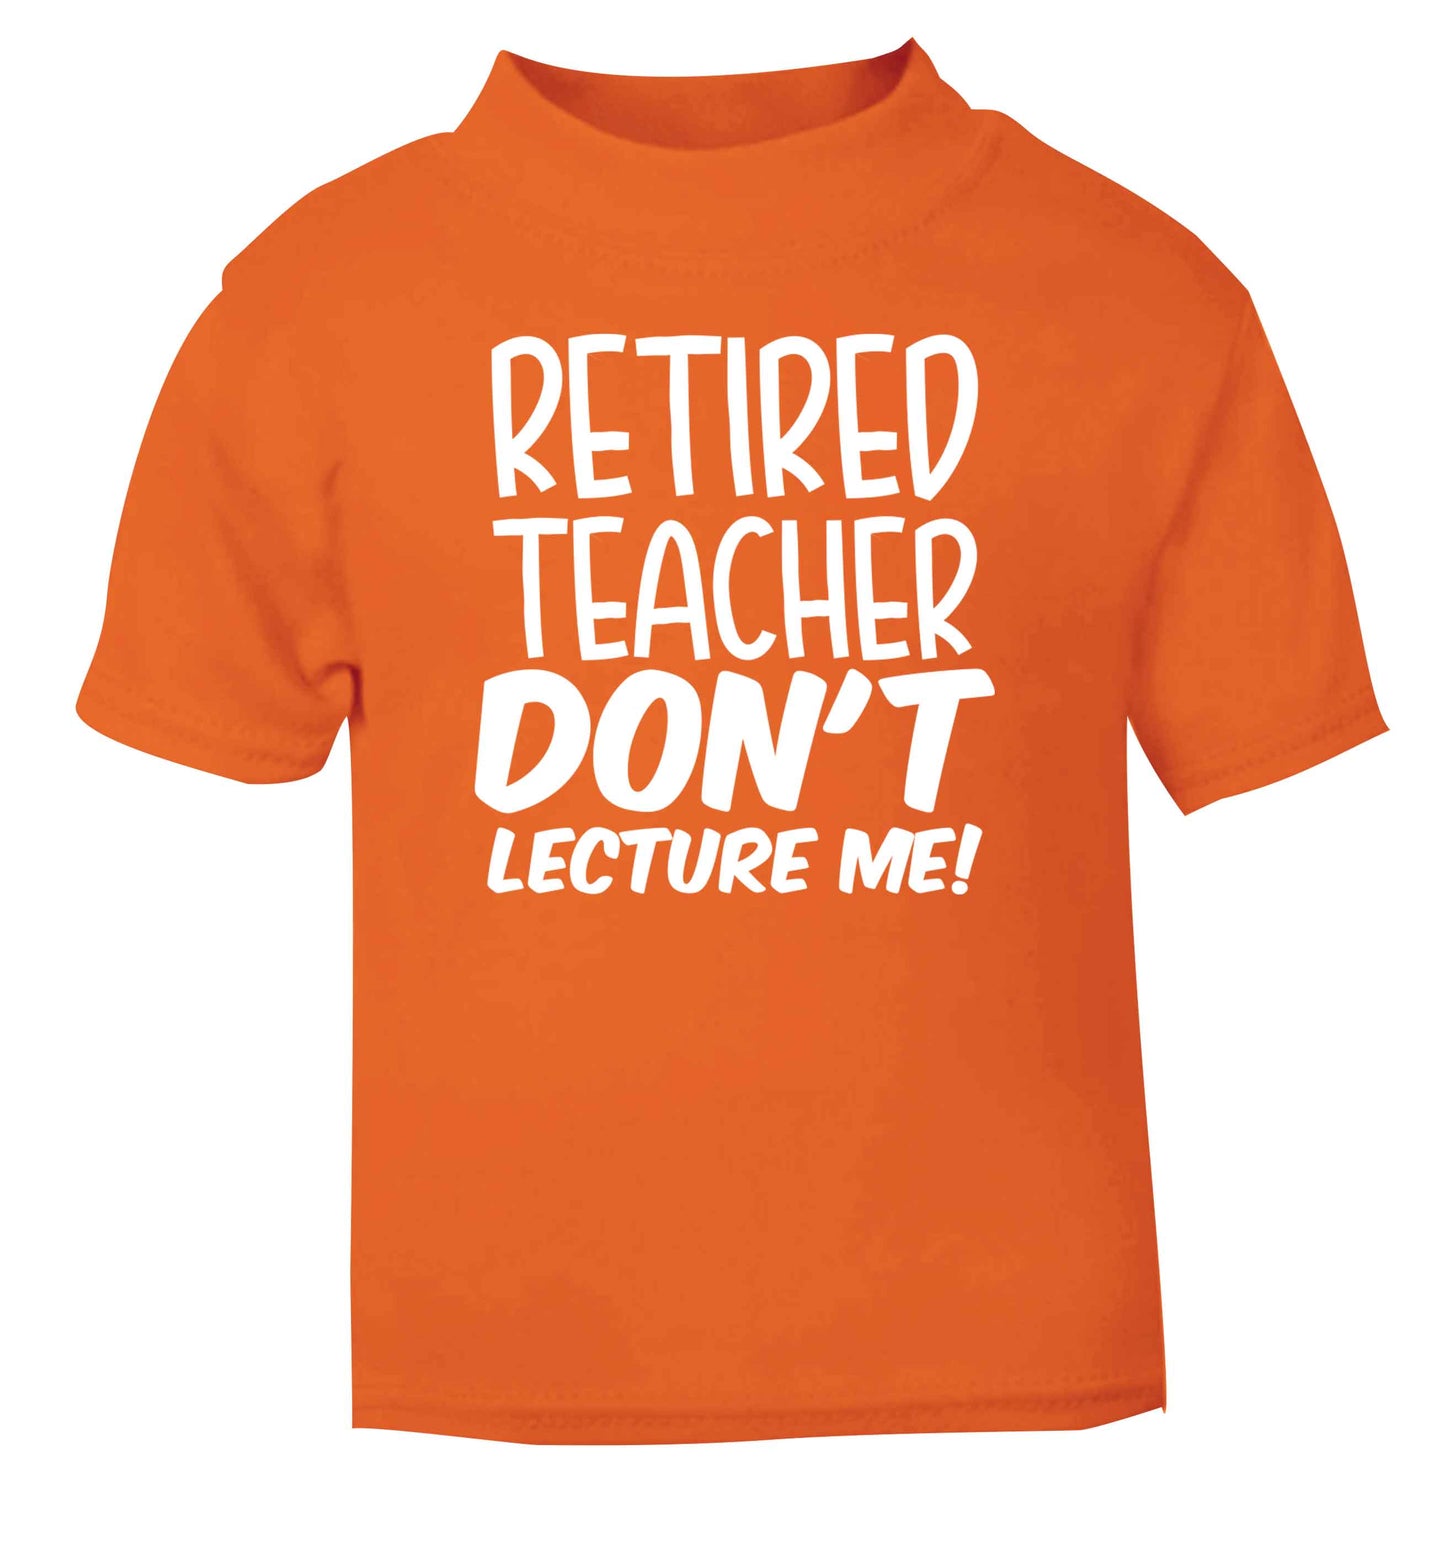 Retired teacher don't lecture me! orange Baby Toddler Tshirt 2 Years